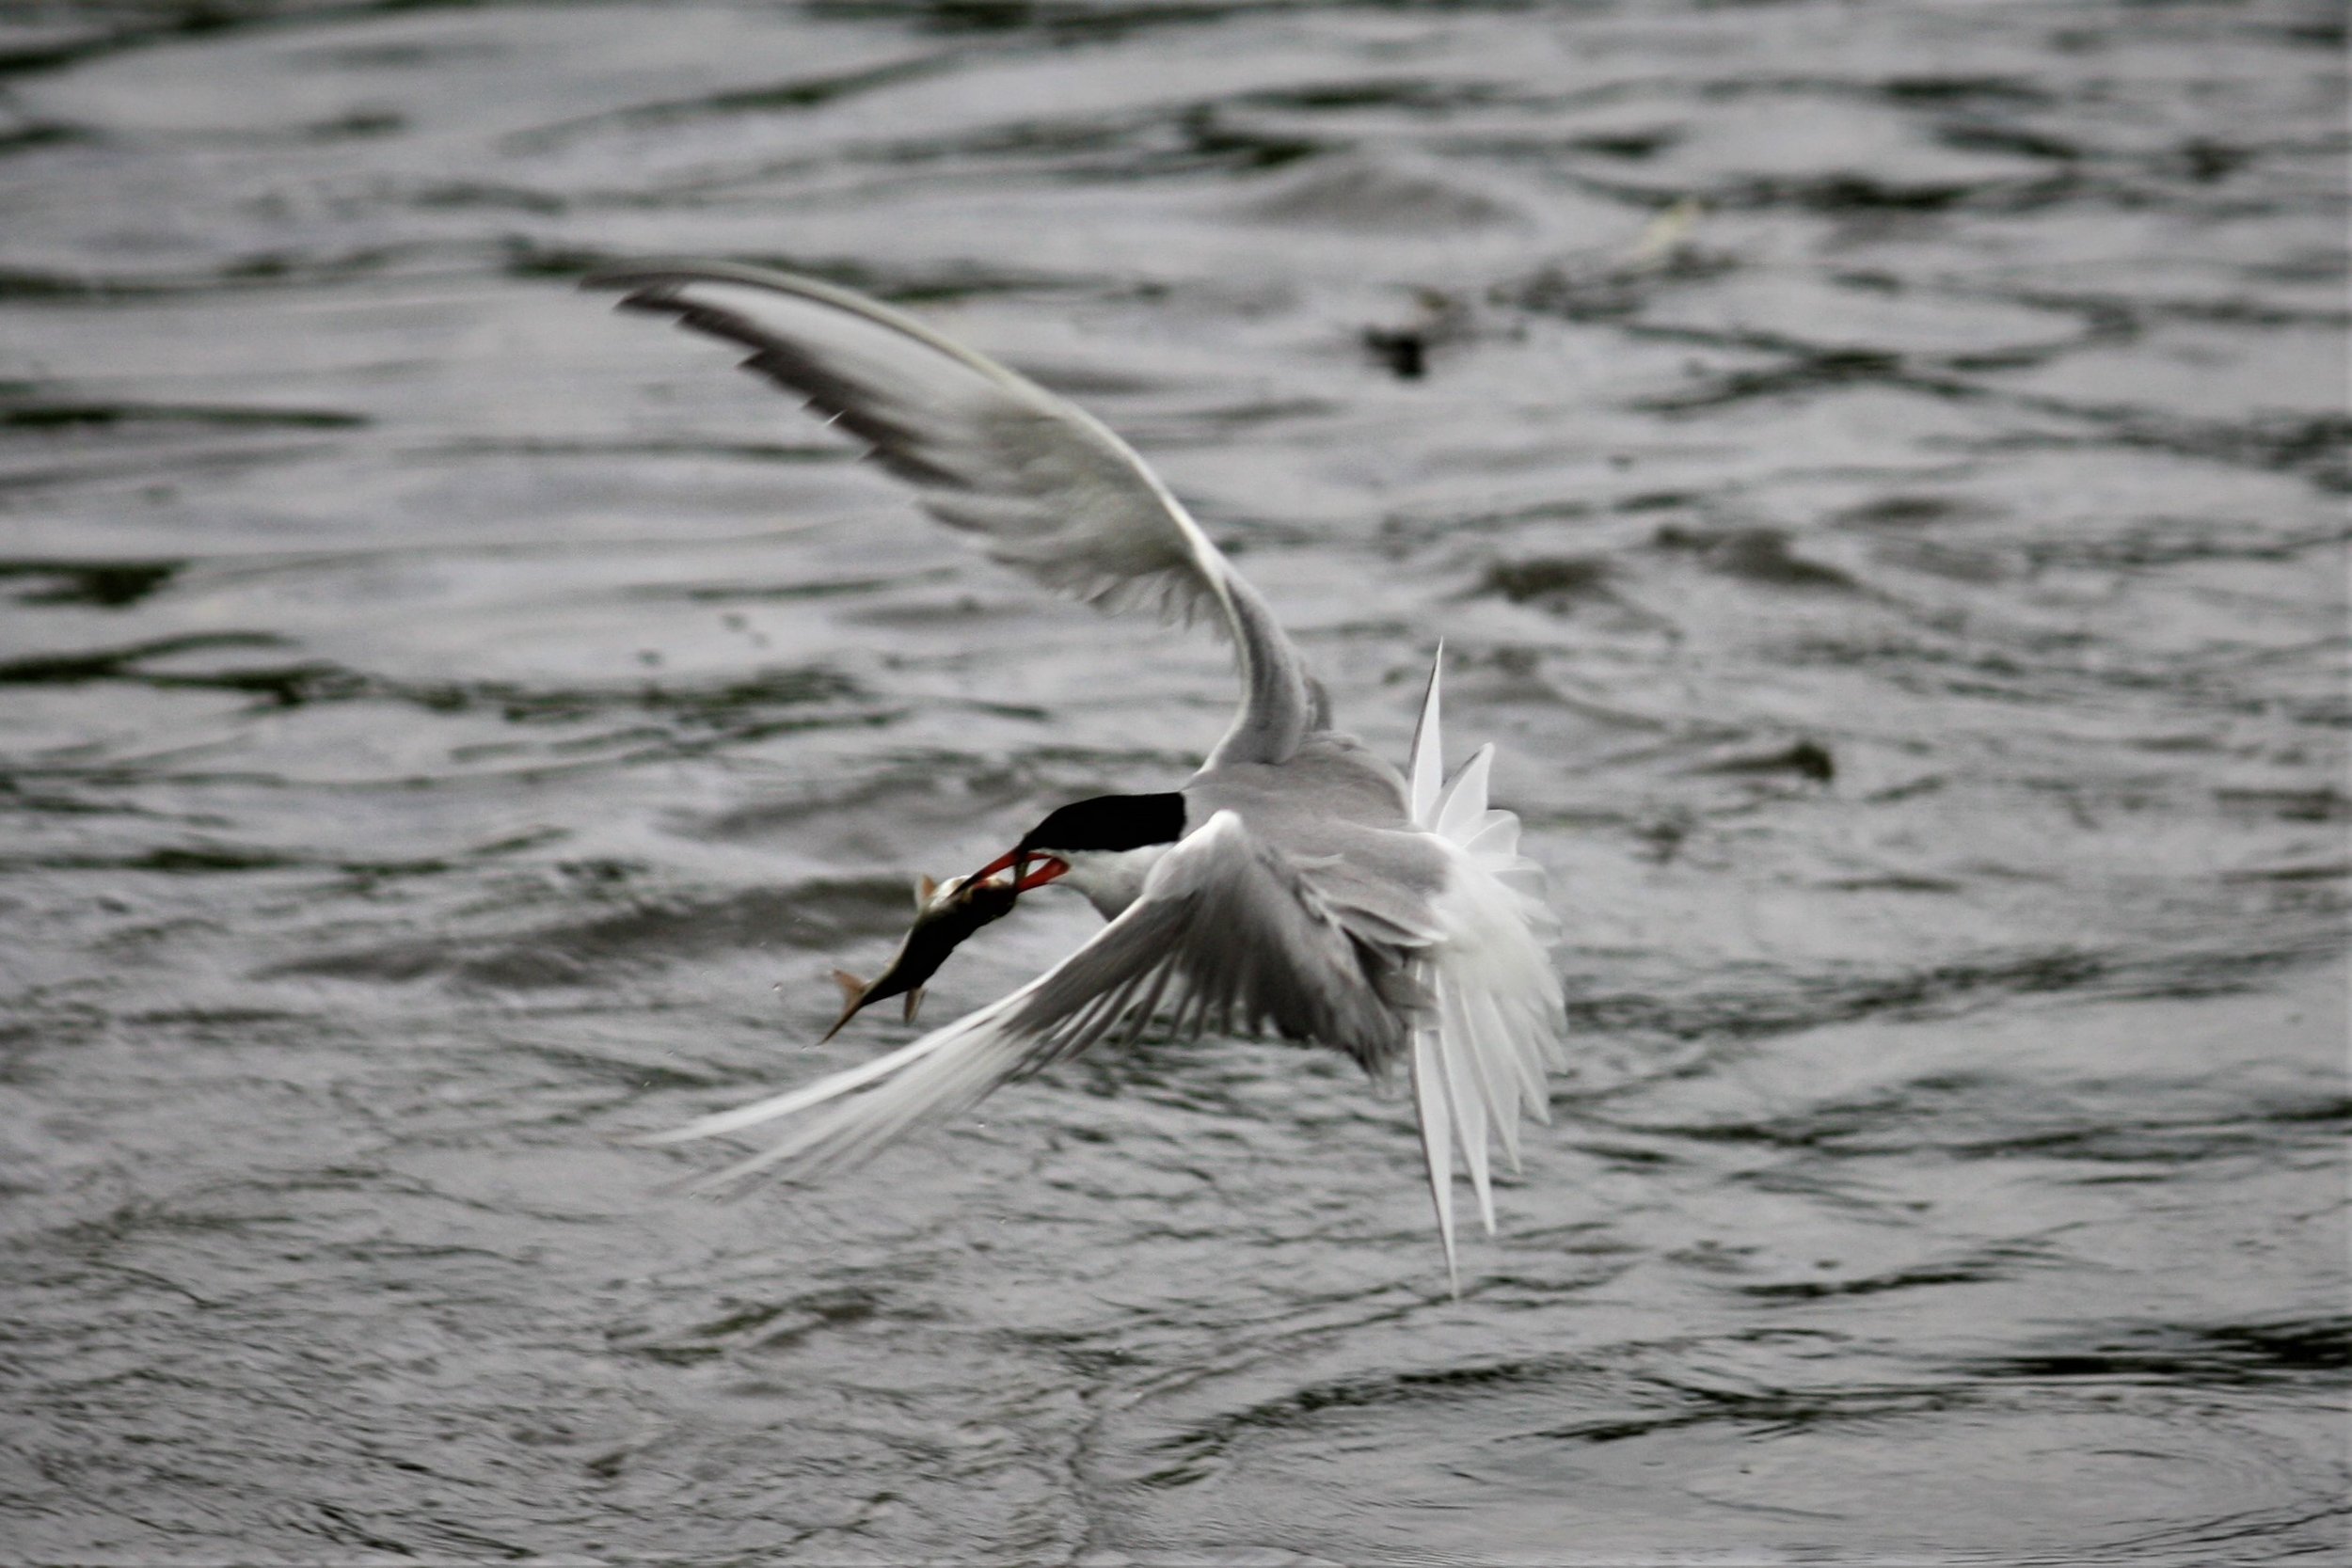  Tern with a fish in its mouth 